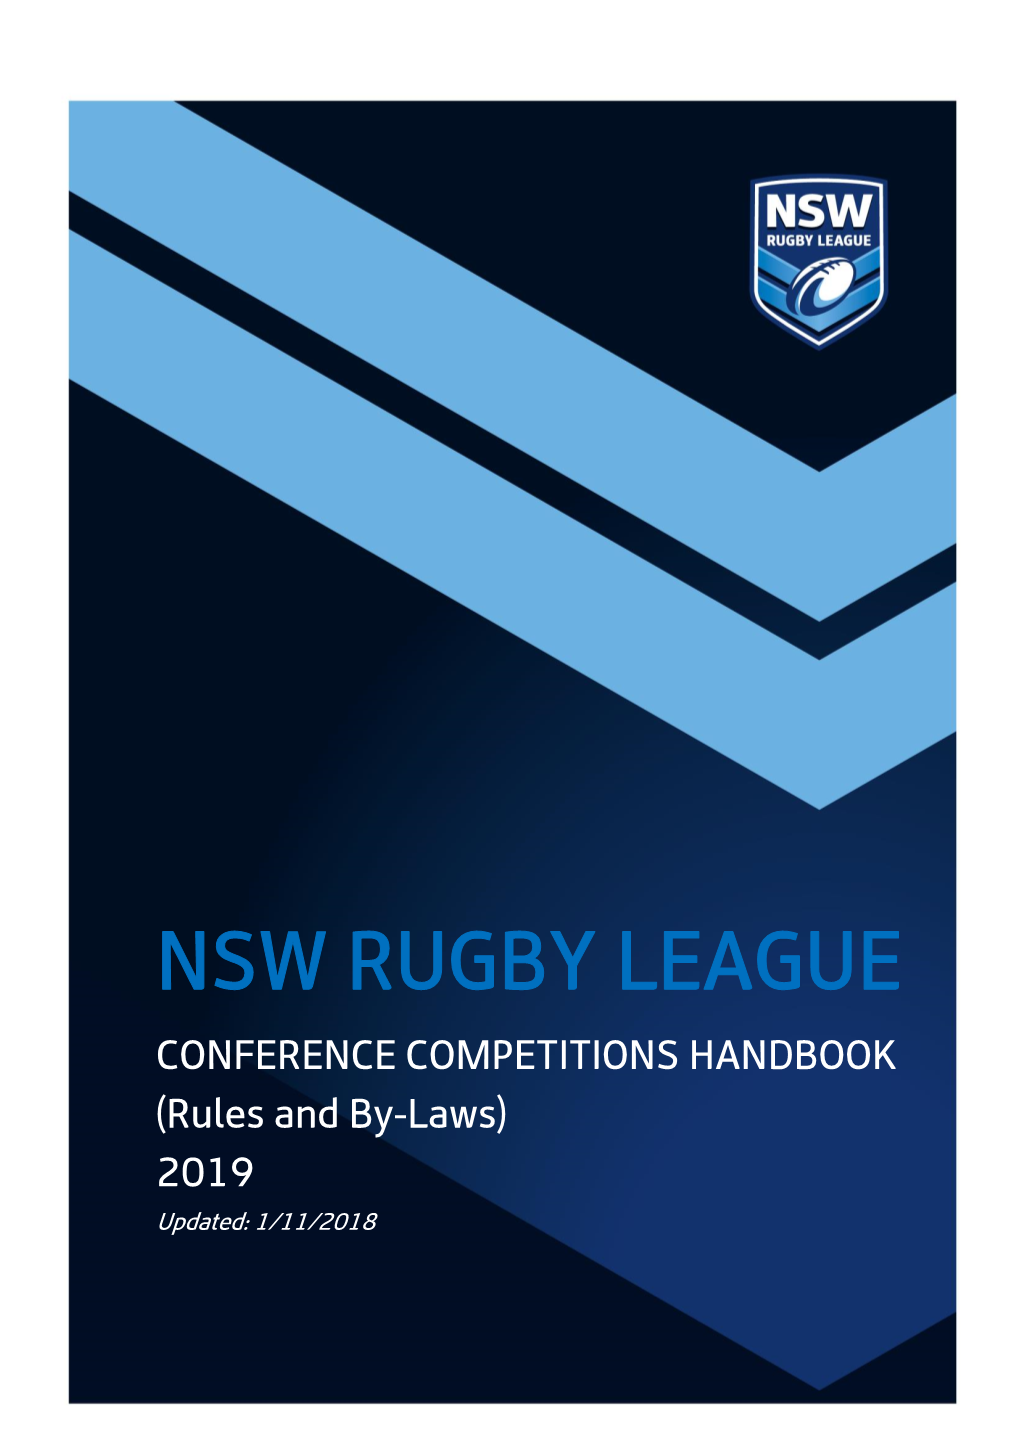 NSW RUGBY LEAGUE CONFERENCE COMPETITIONS HANDBOOK (Rules and By-Laws) 2019 Updated: 1/11/2018 NSWRL CONFERENCE COMPETITIONS HANDBOOK 2019